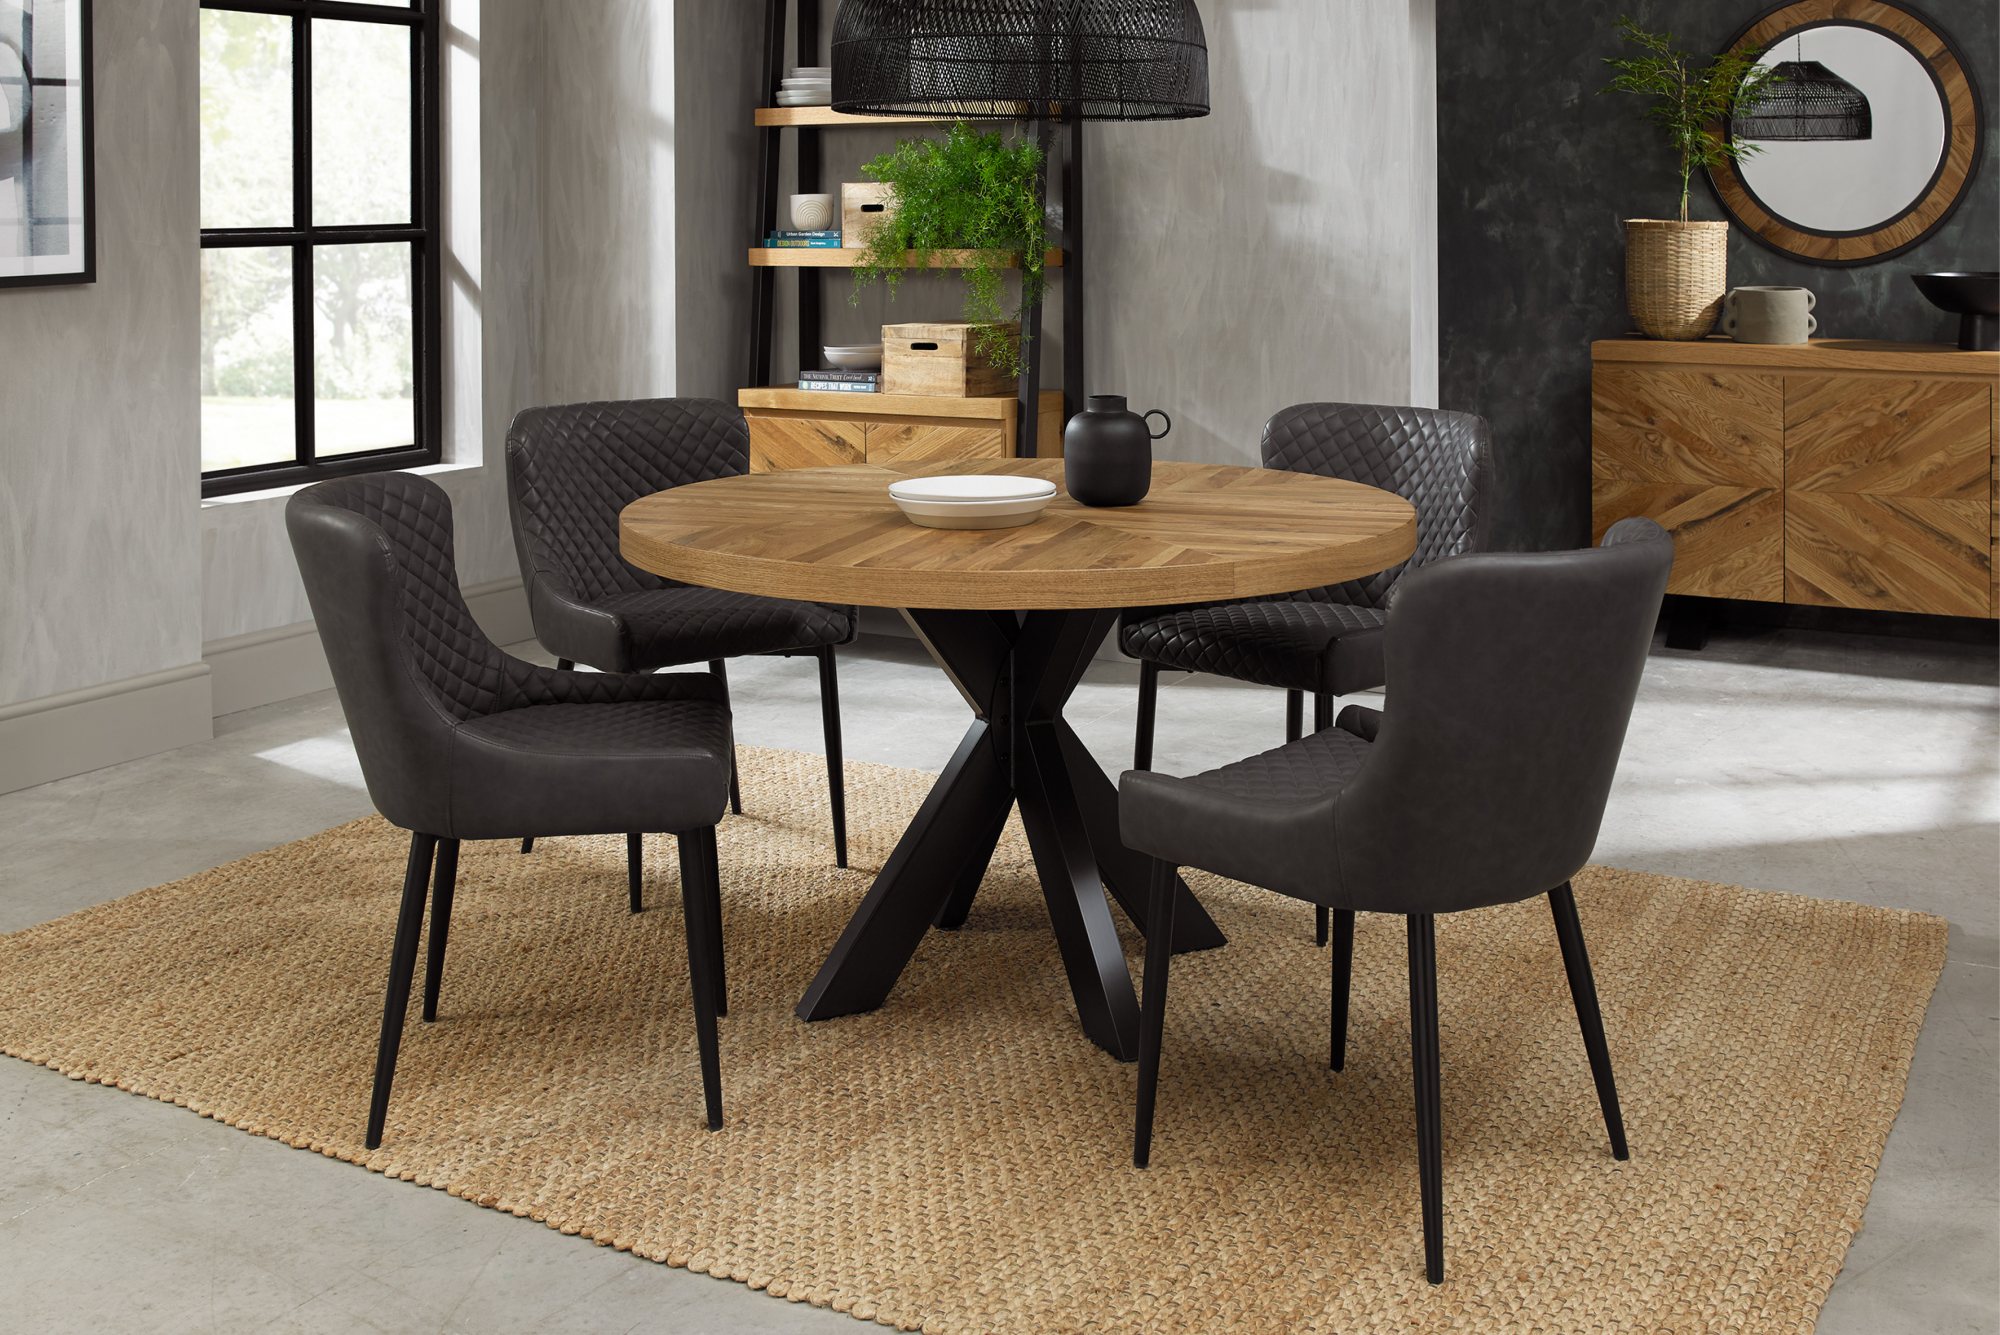 Home Origins Bosco Rustic Oak 4 seater dining table with 4 Cezanne chairs- dark grey faux leather fabric